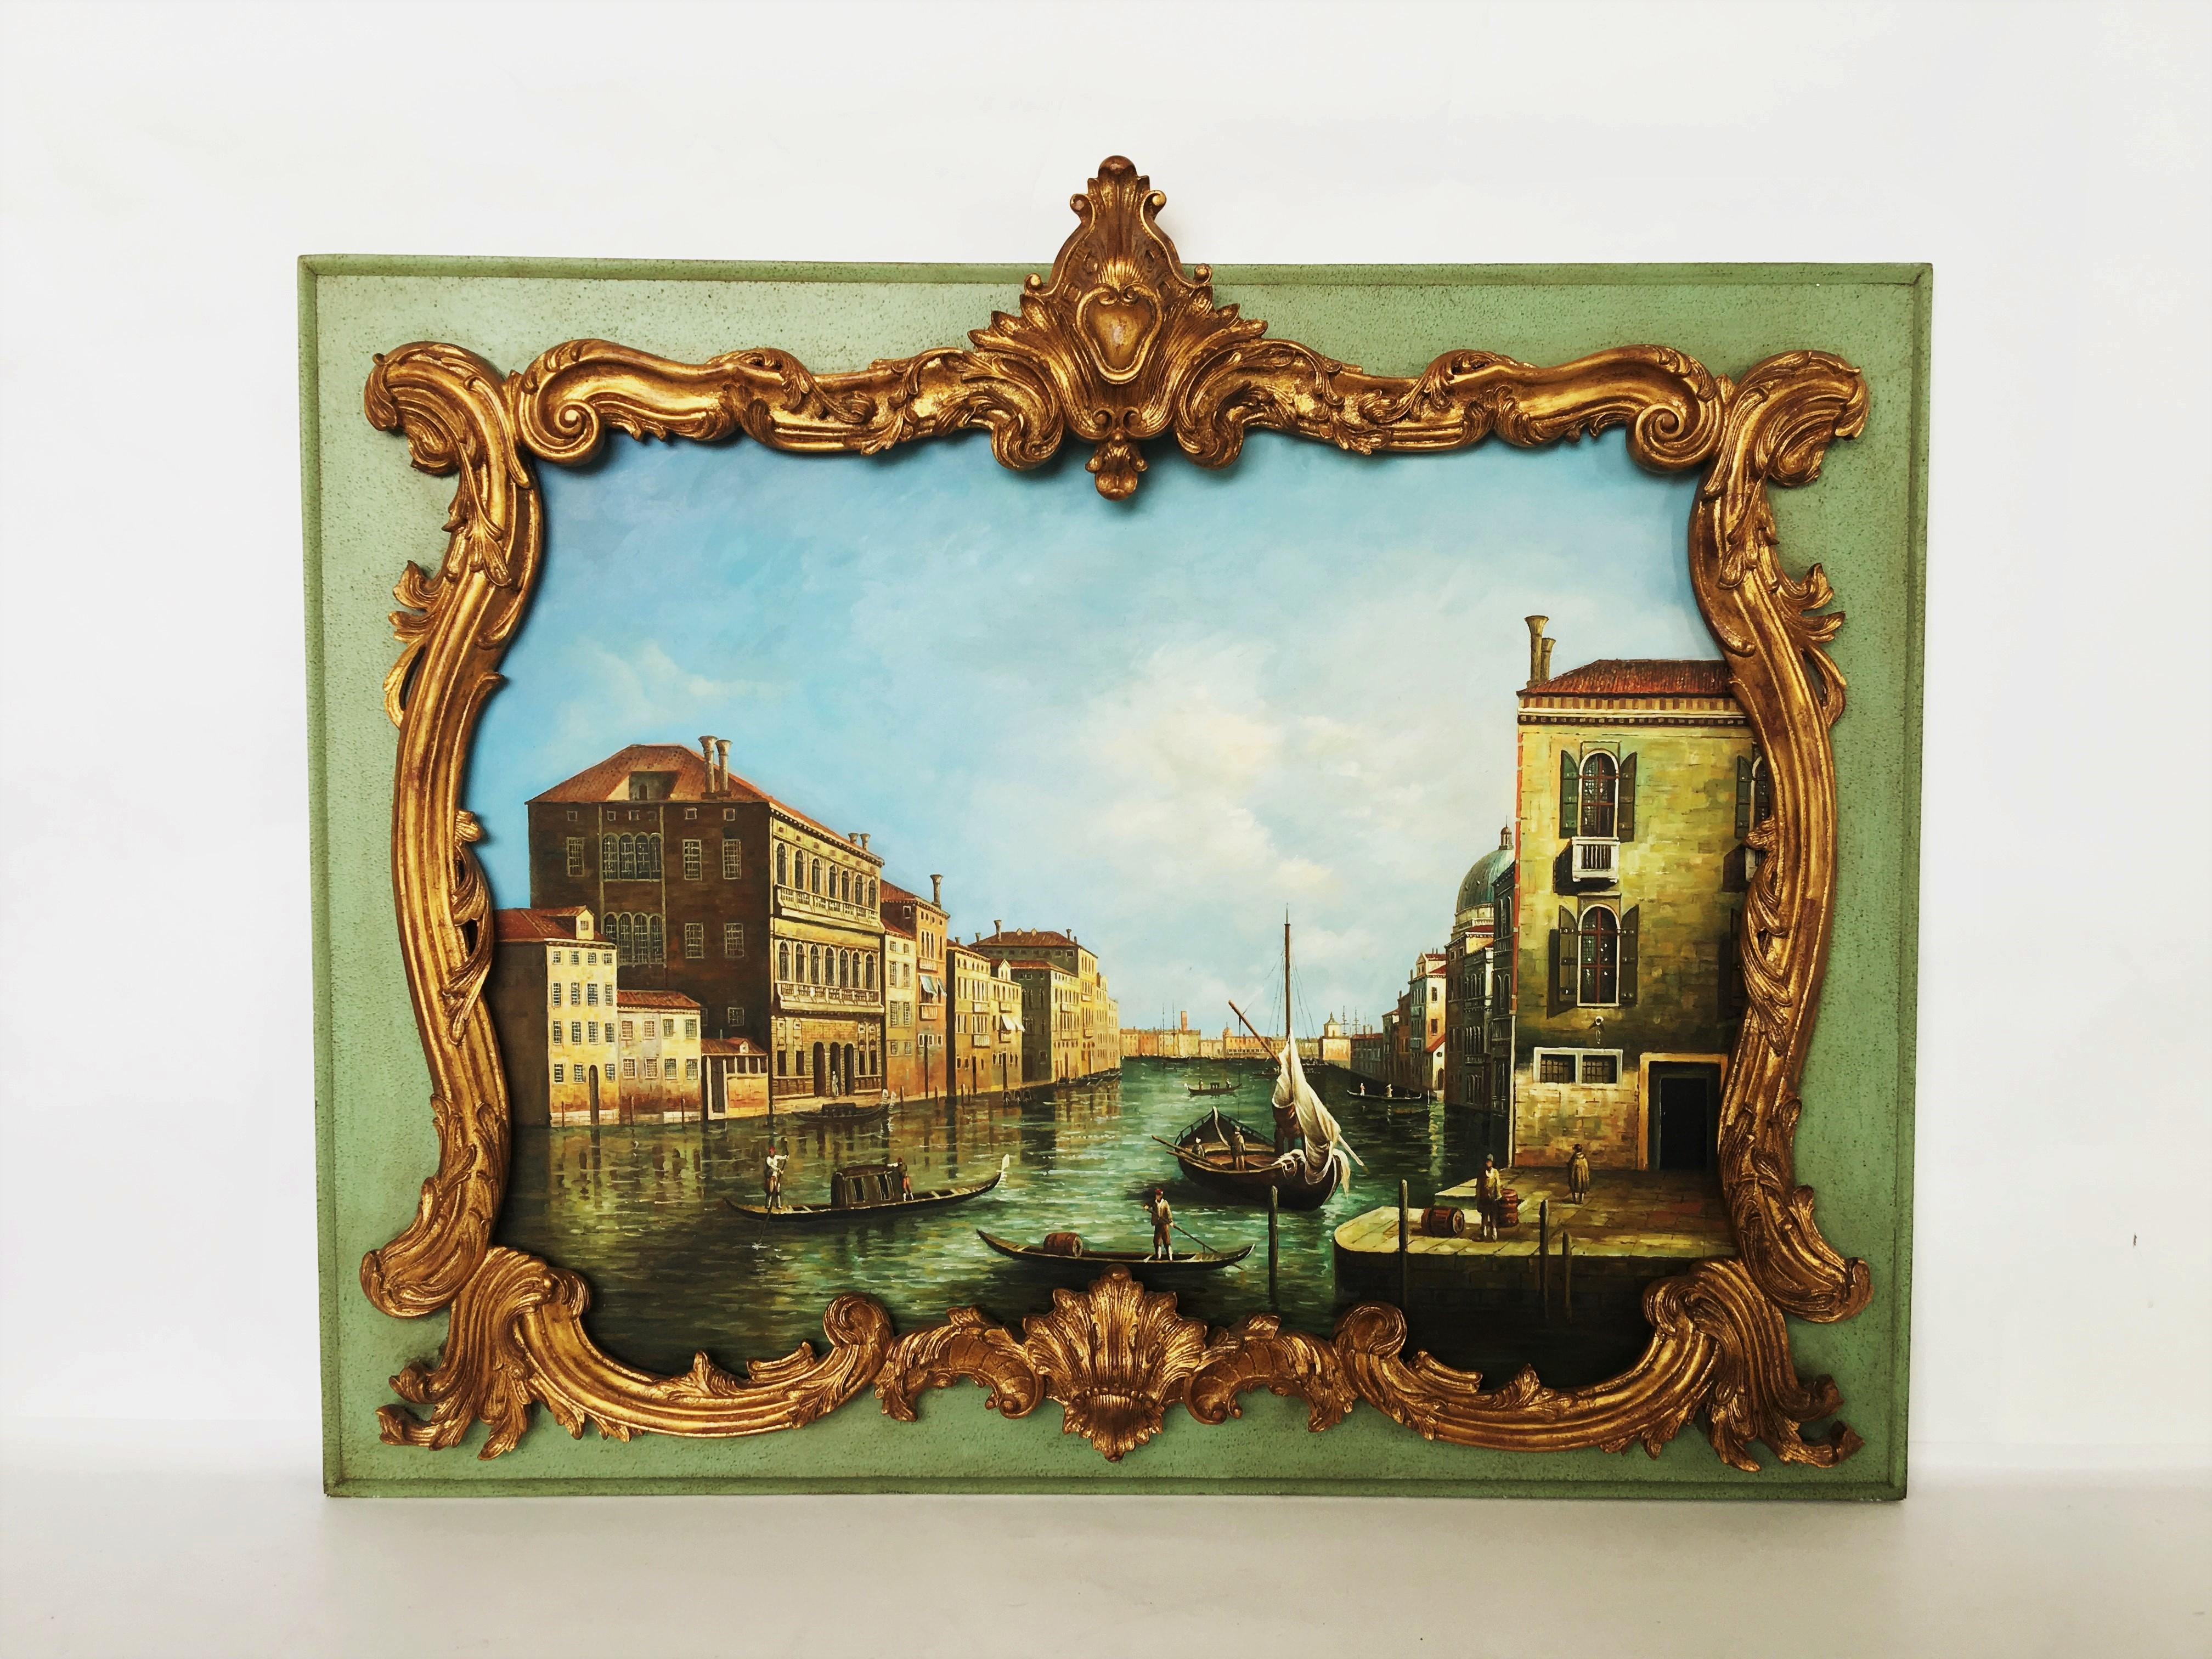 Very high quality an opposing pair of 20th century Italian school oil paintings after the renowned British artist Alfred Pollentine (1836-1890). Framing the paintings are exquisite carved qiltwood fillets, foliate design and green color. 
Both